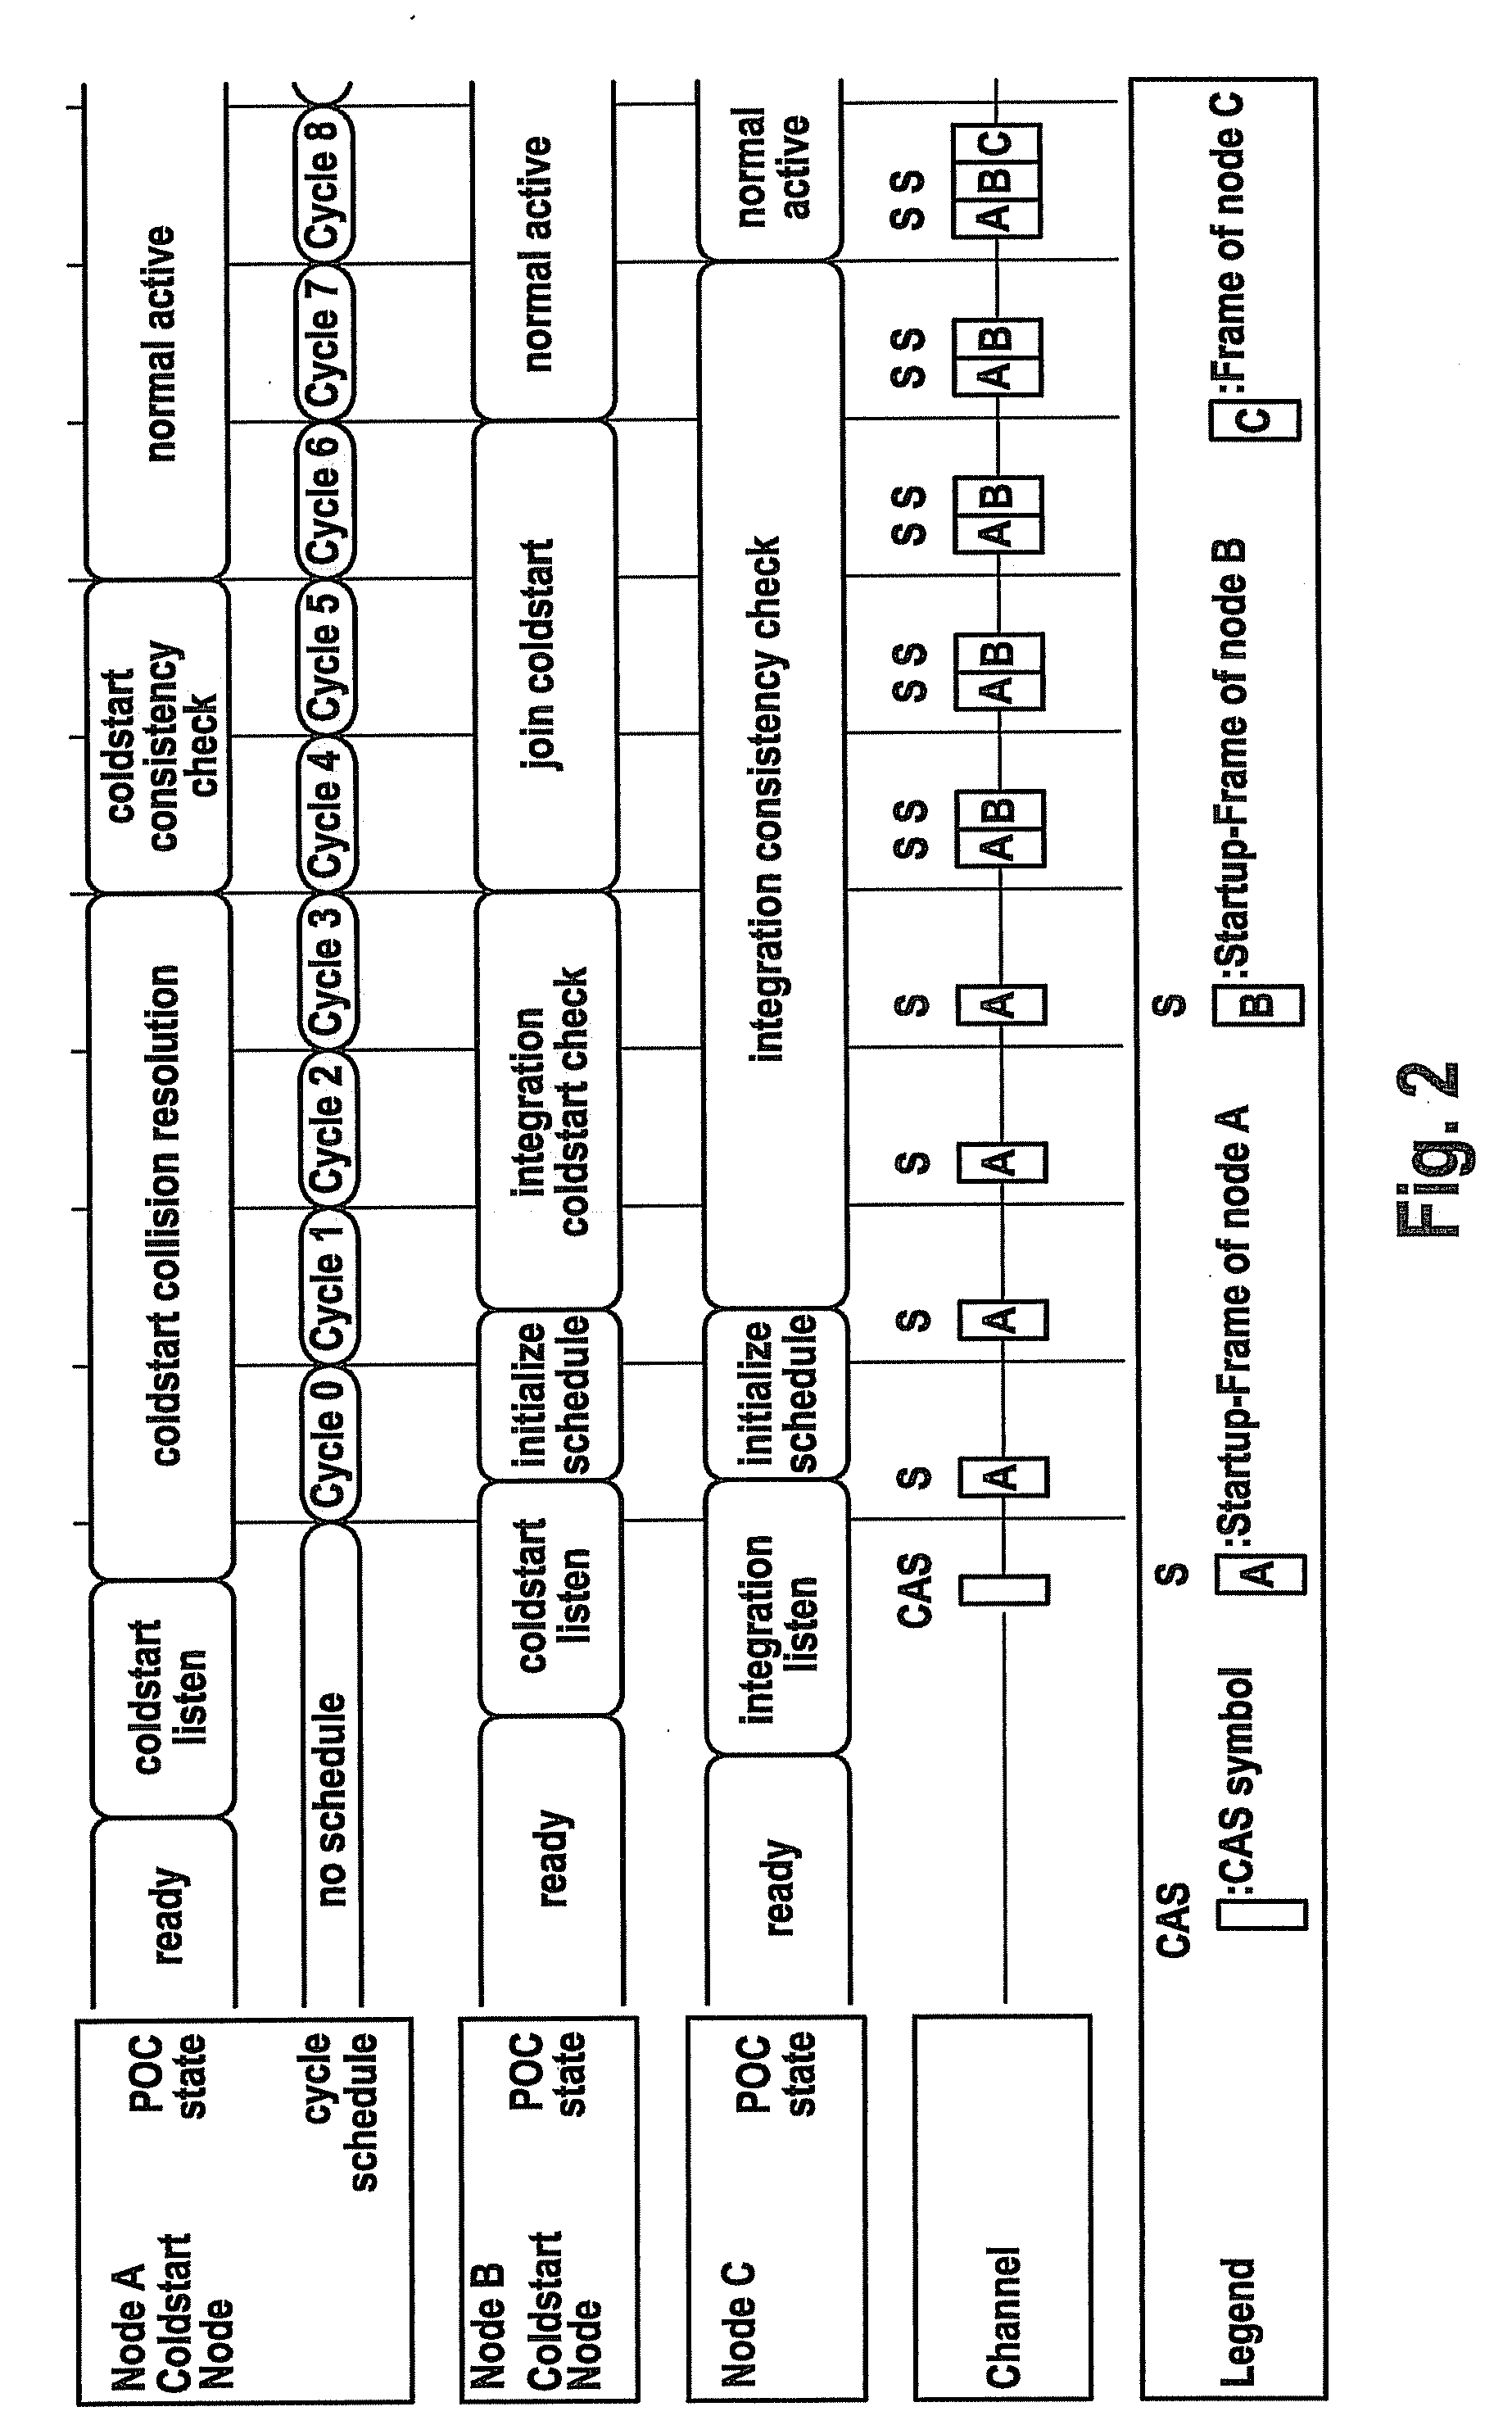 Method for starting a communication system, a communication system having a communication medium and a plurality of subscribers connected thereto, and subscribers of such a communication system